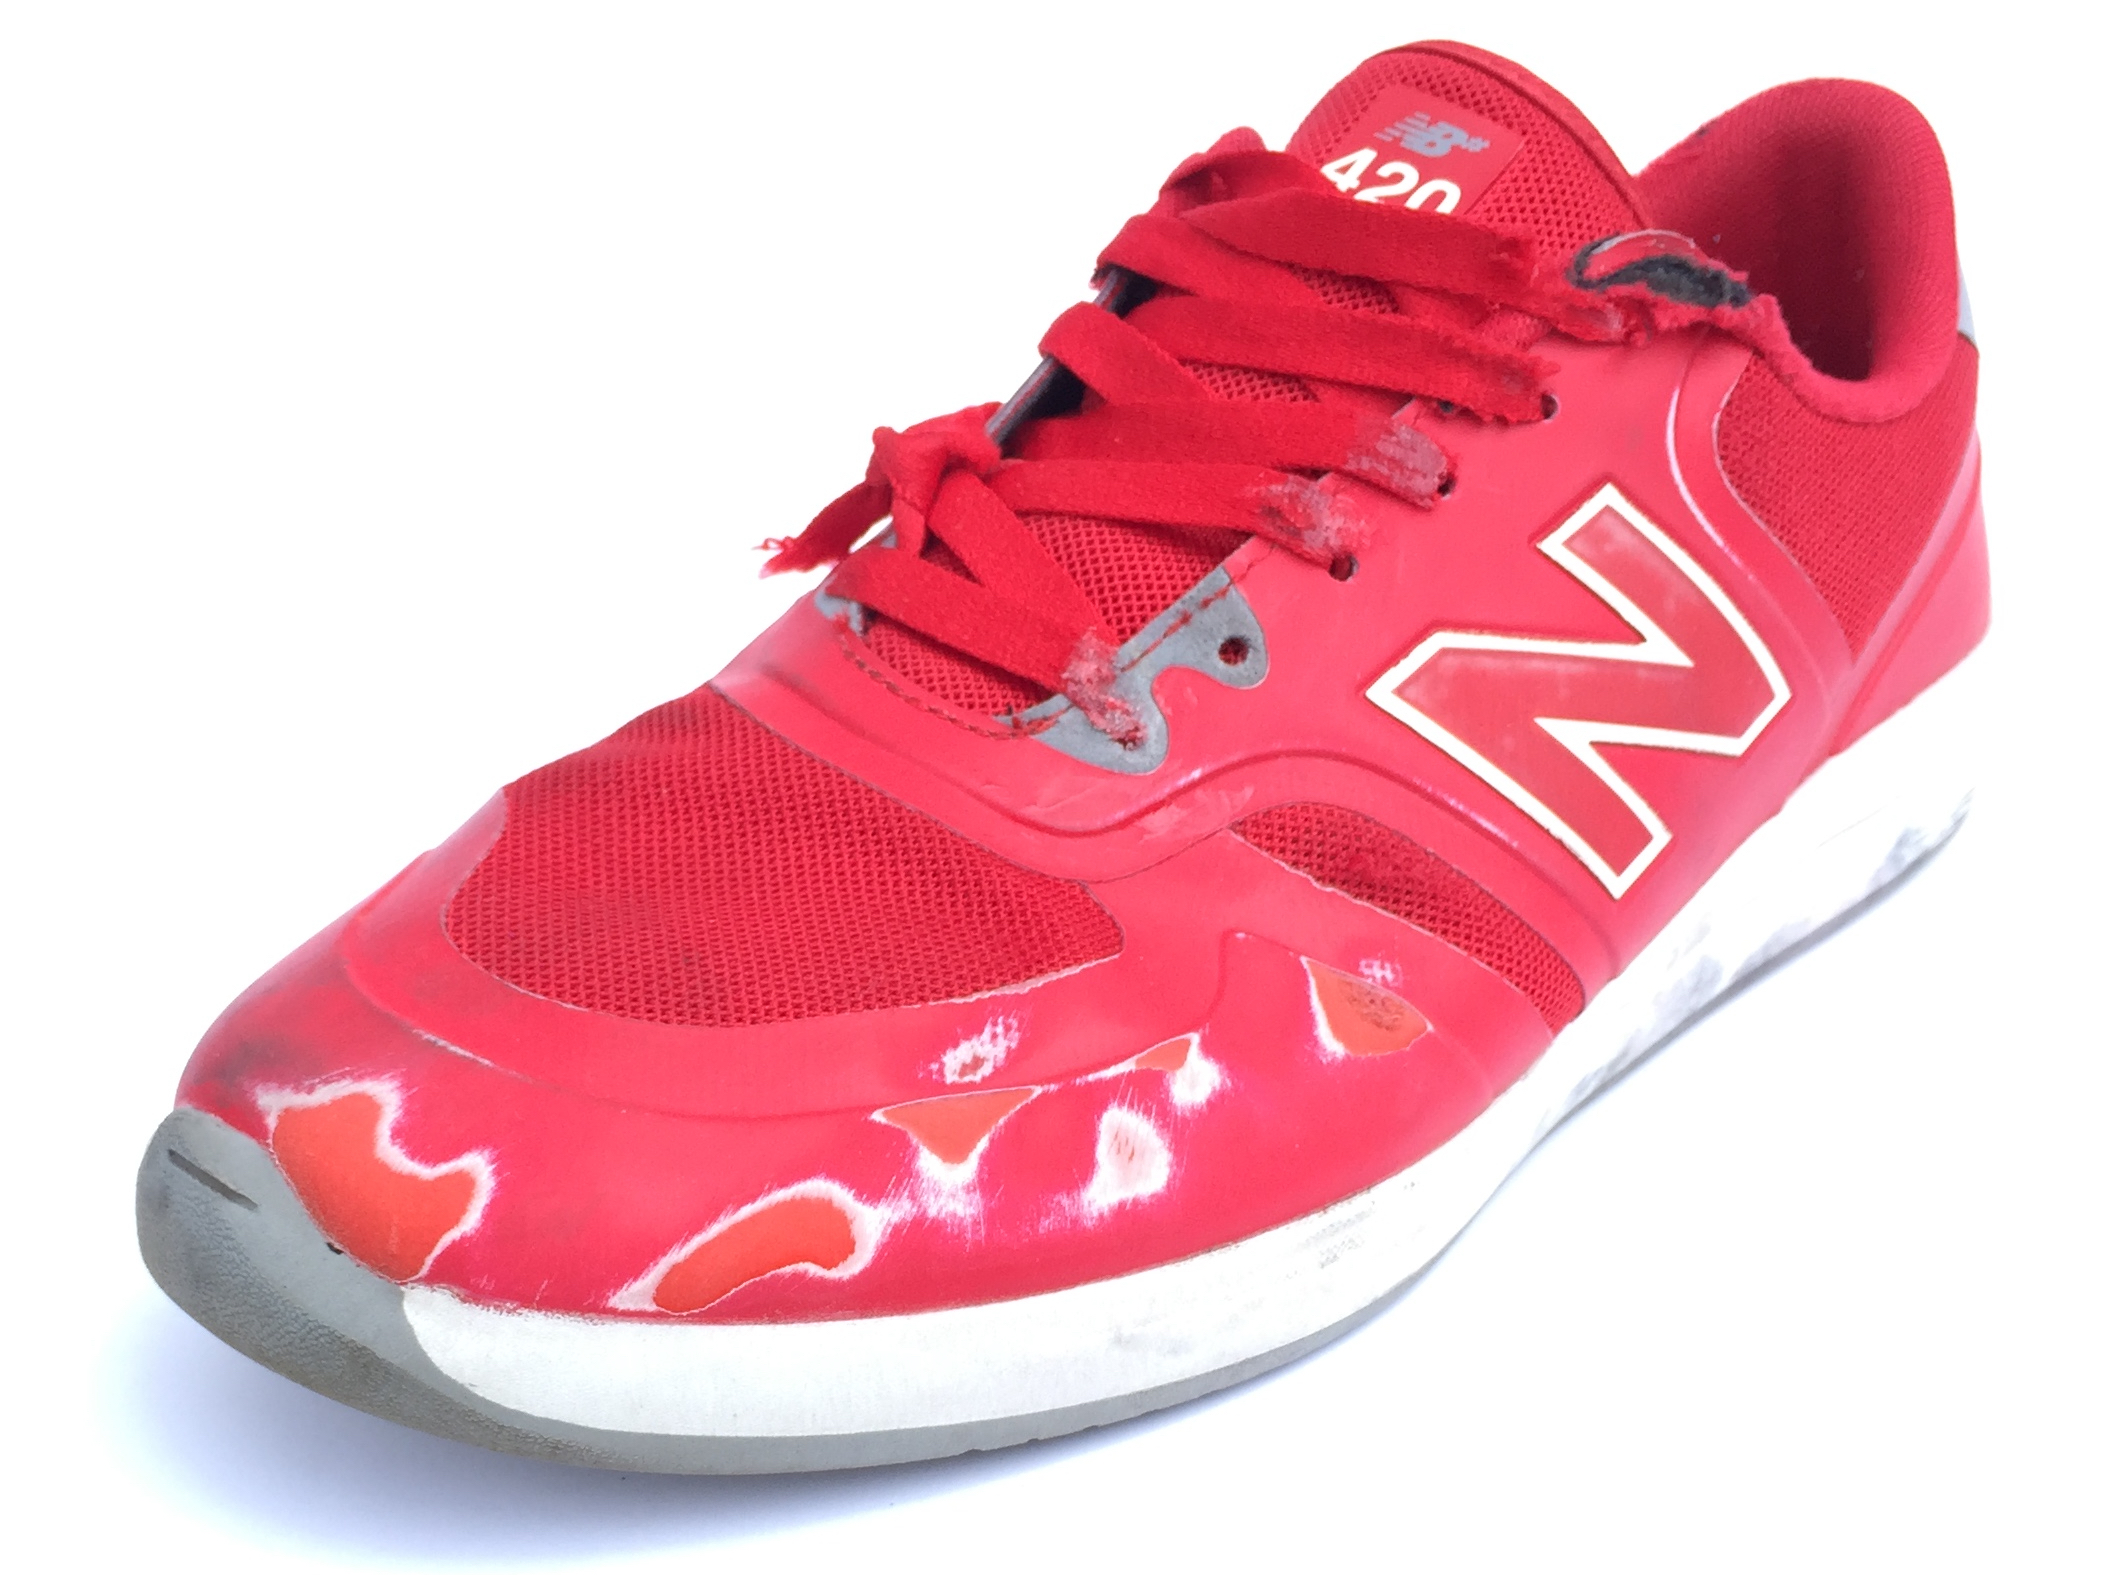 New Balance Numeric 420 - Weartested - detailed skate shoe reviews